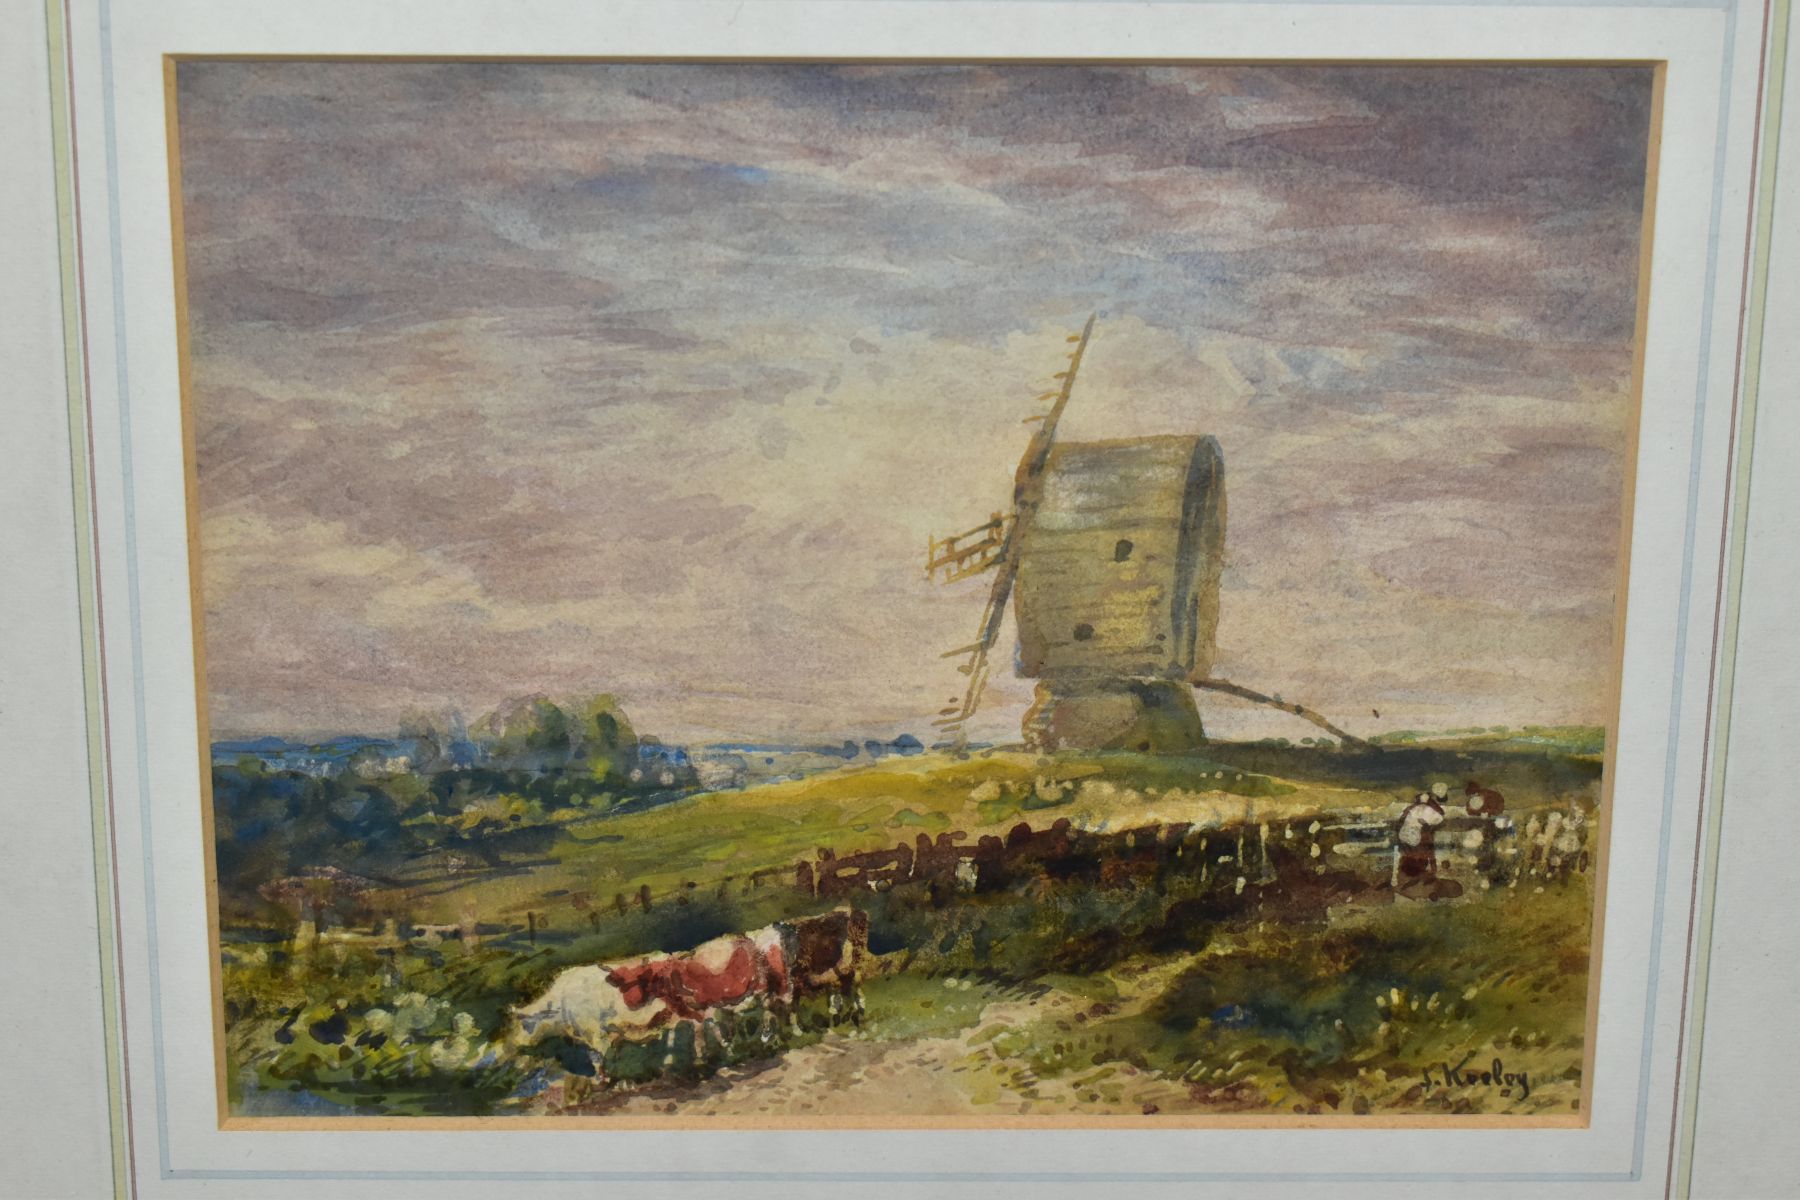 JOHN KEELEY (BRITISH 1849-1930) 'A WARWICKSHIRE LANDMARK' a landscape with cattle and a windmill, - Image 2 of 4